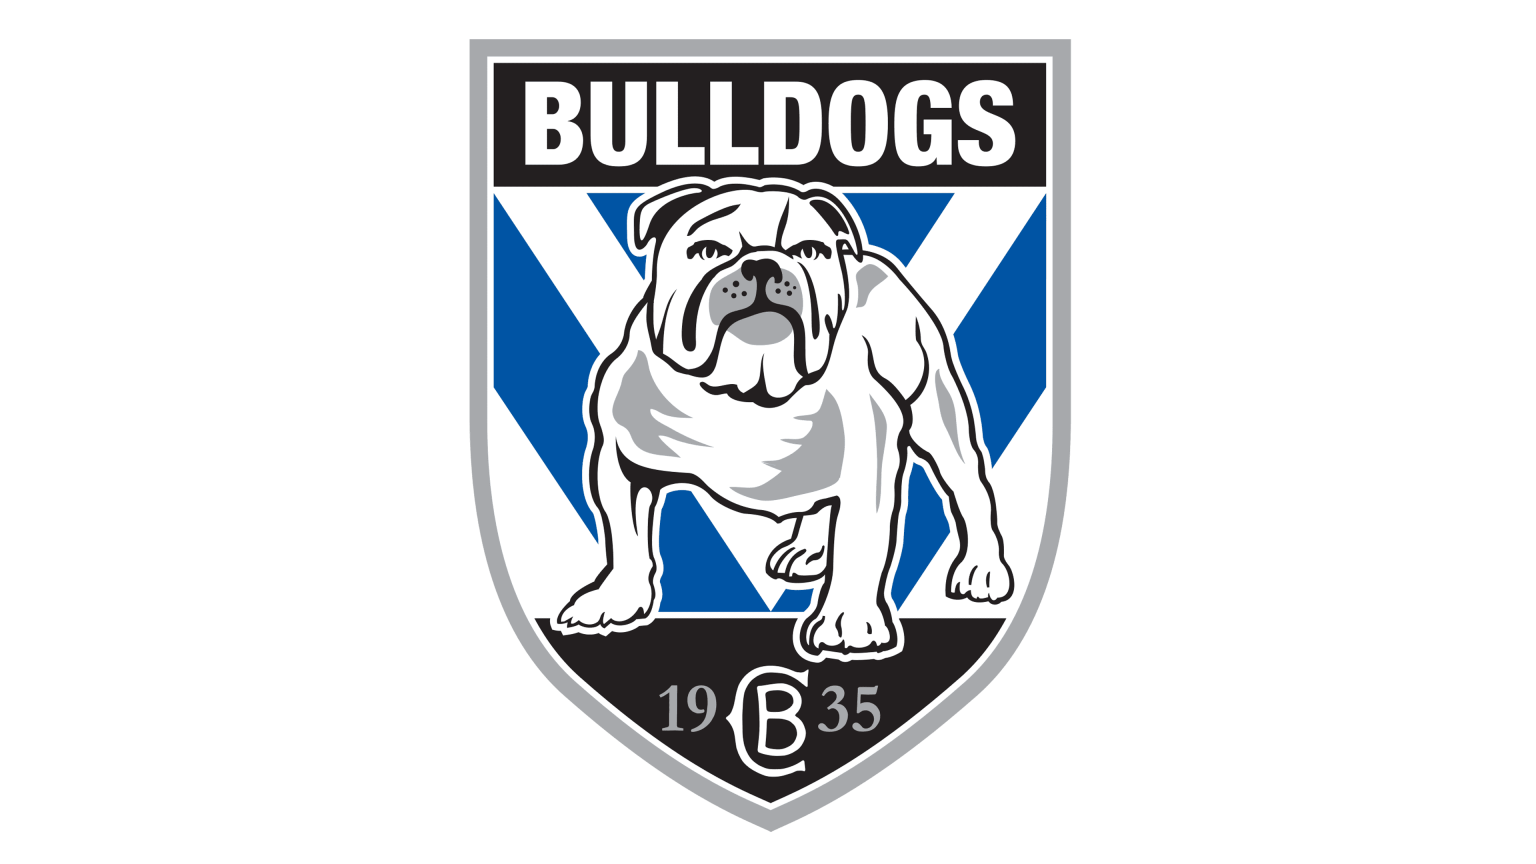 Bulldogs logo png - Download Free Png Images